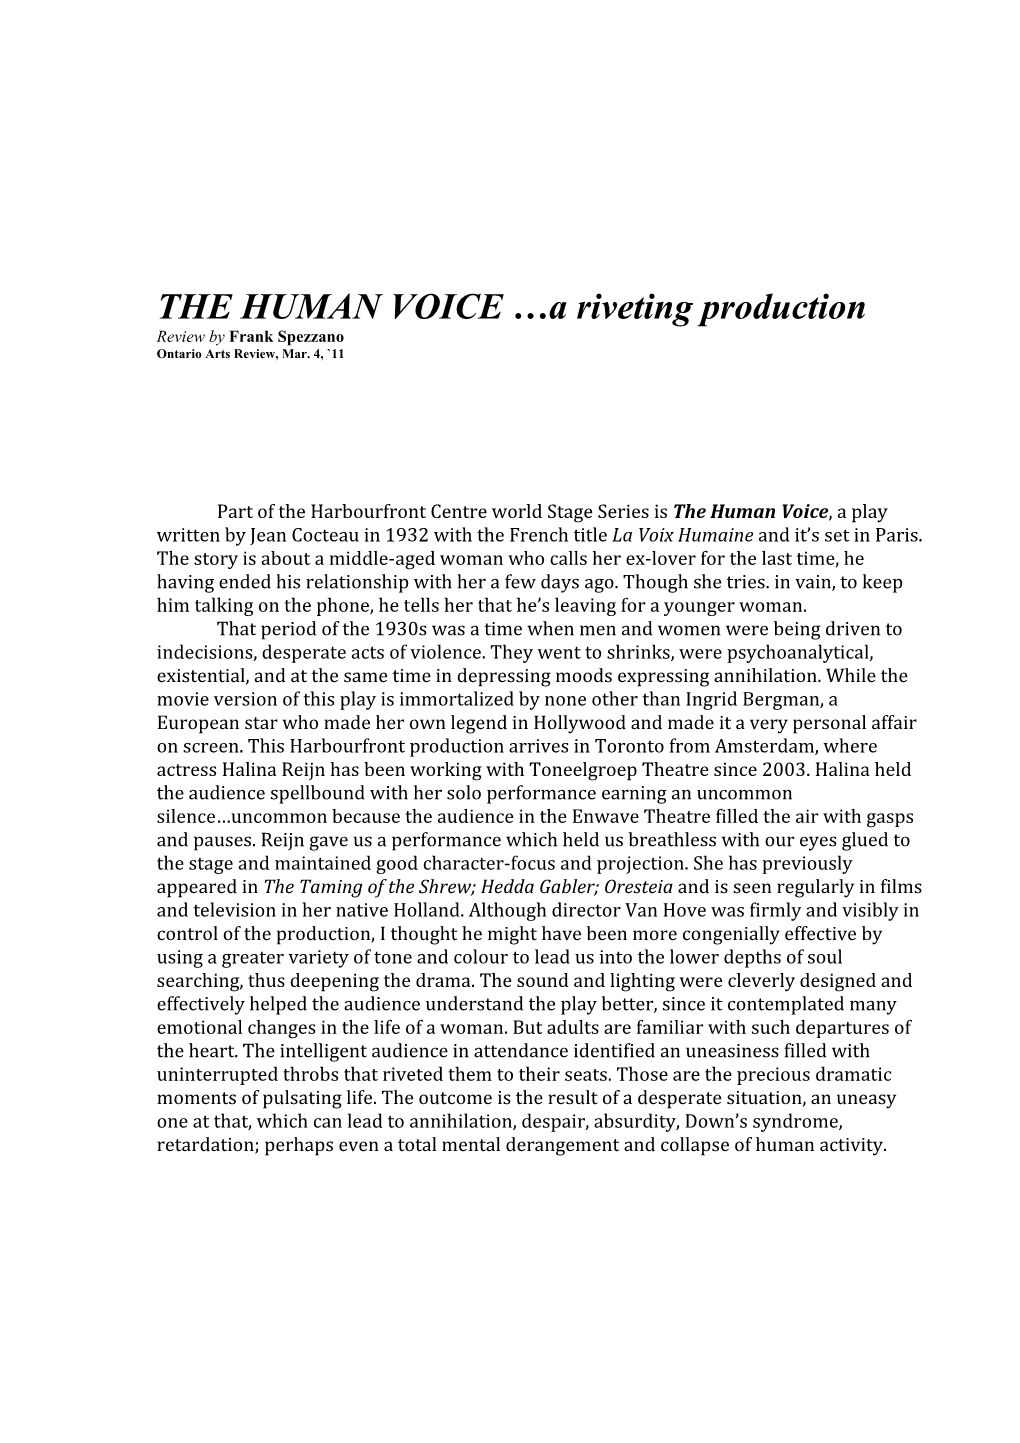 THE HUMAN VOICE …A Riveting Production Review by Frank Spezzano Ontario Arts Review, Mar